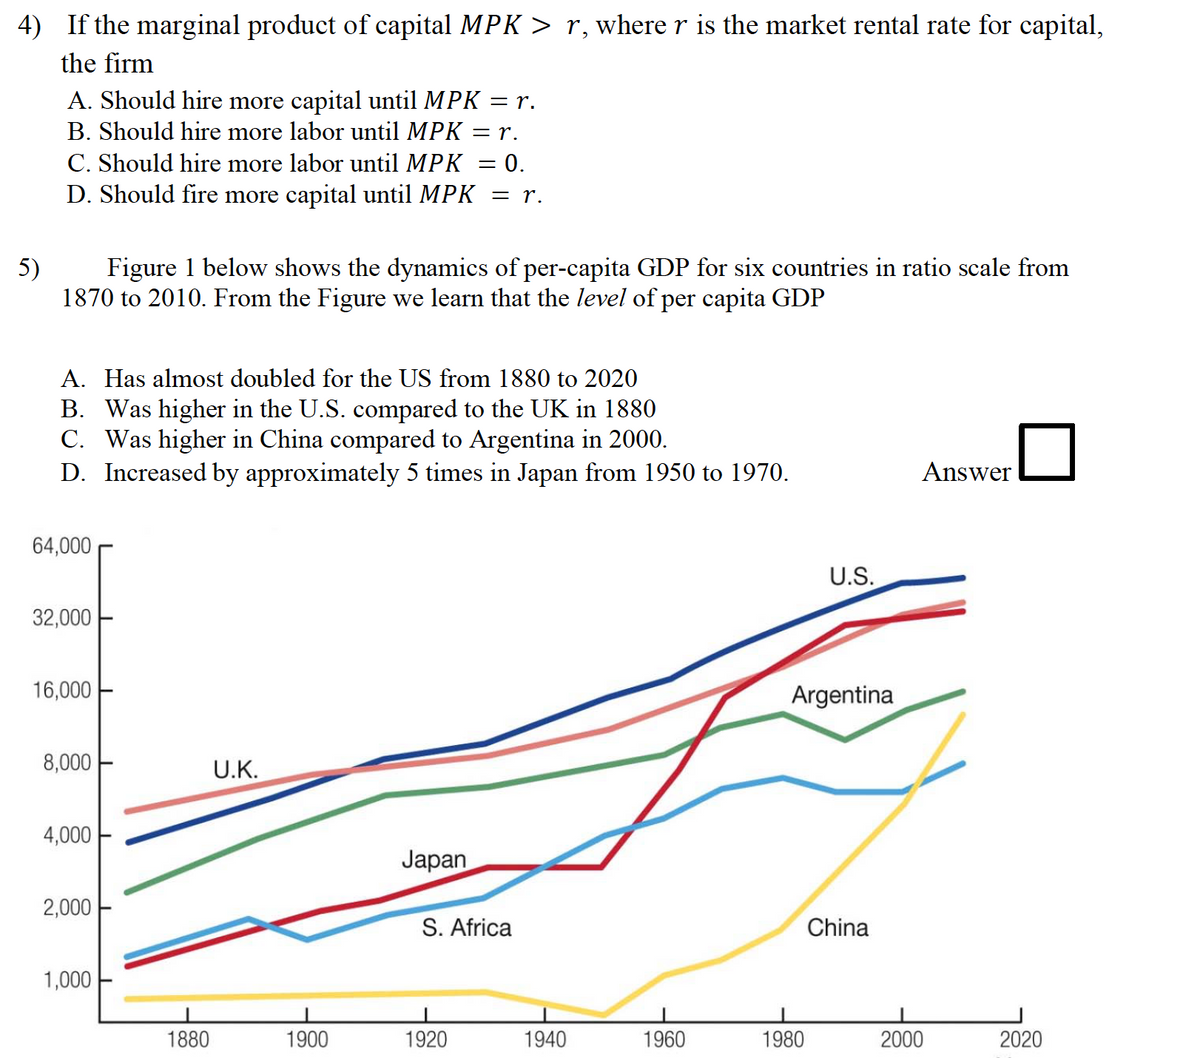 4) If the marginal product of capital MPK > r, where r is the market rental rate for capital,
the firm
A. Should hire more capital until MPK = r.
B. Should hire more labor until MPK = r.
C. Should hire more labor until MPK = 0.
D. Should fire more capital until MPK = r.
%3D
5)
Figure 1 below shows the dynamics of per-capita GDP for six countries in ratio scale from
1870 to 2010. From the Figure we learn that the level of per capita GDP
A. Has almost doubled for the US from 1880 to 2020
B. Was higher in the U.S. compared to the UK in 1880
C. Was higher in China compared to Argentina in 2000.
D. Increased by approximately 5 times in Japan from 1950 to 1970.
Answer
64,000
U.S.
32,000
16,000
Argentina
8,000
U.K.
4,000
Japan
2,000
S. Africa
China
1,000
1880
1900
1920
1940
1960
1980
2000
2020
